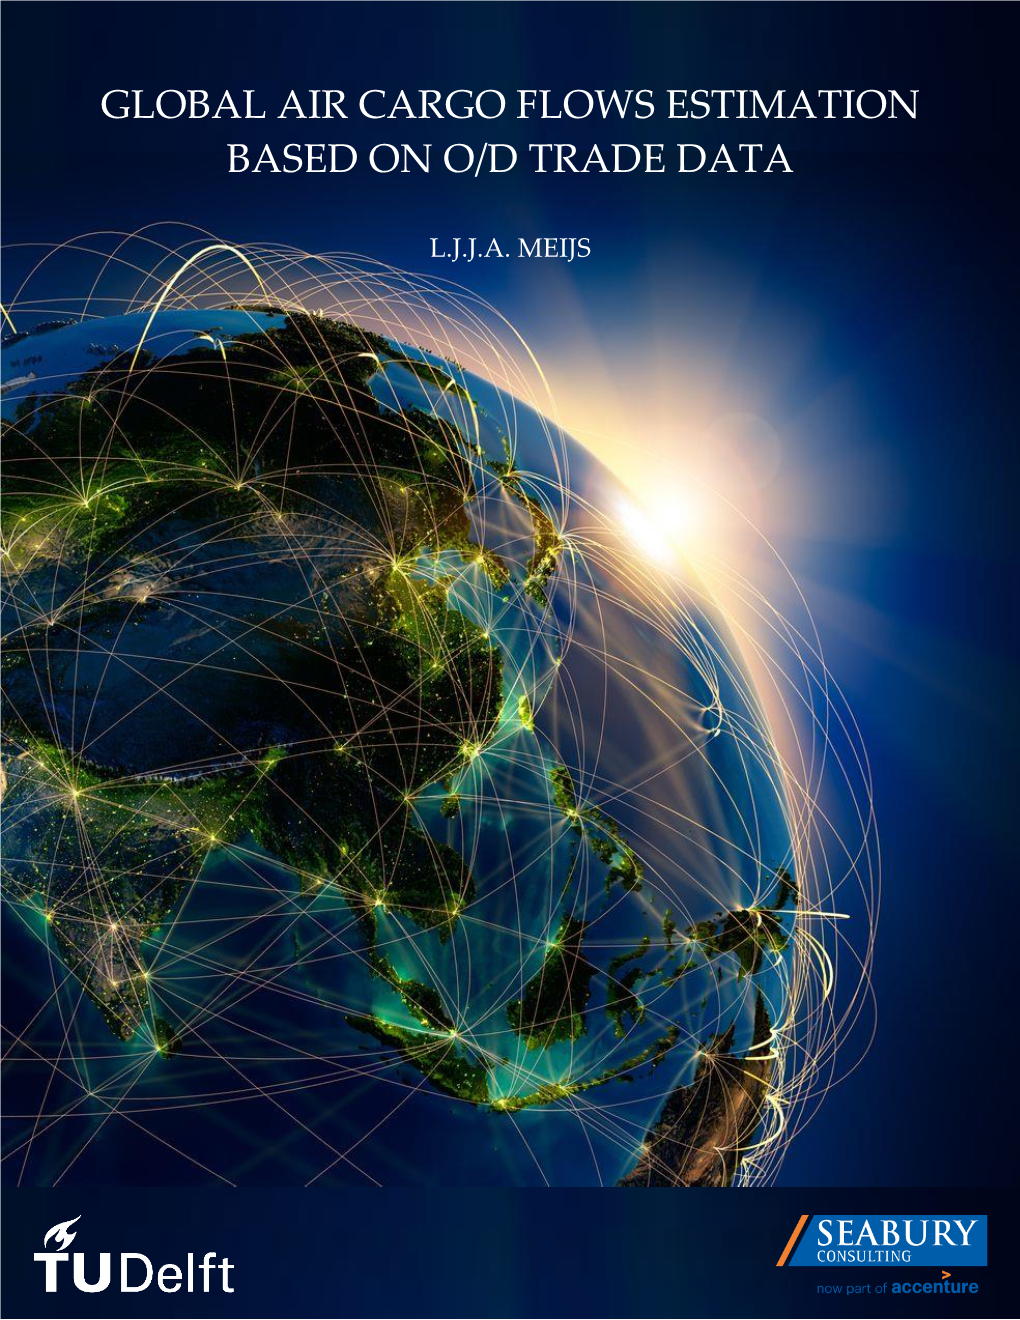 Global Air Cargo Flows Estimation Based on O/D Trade Data